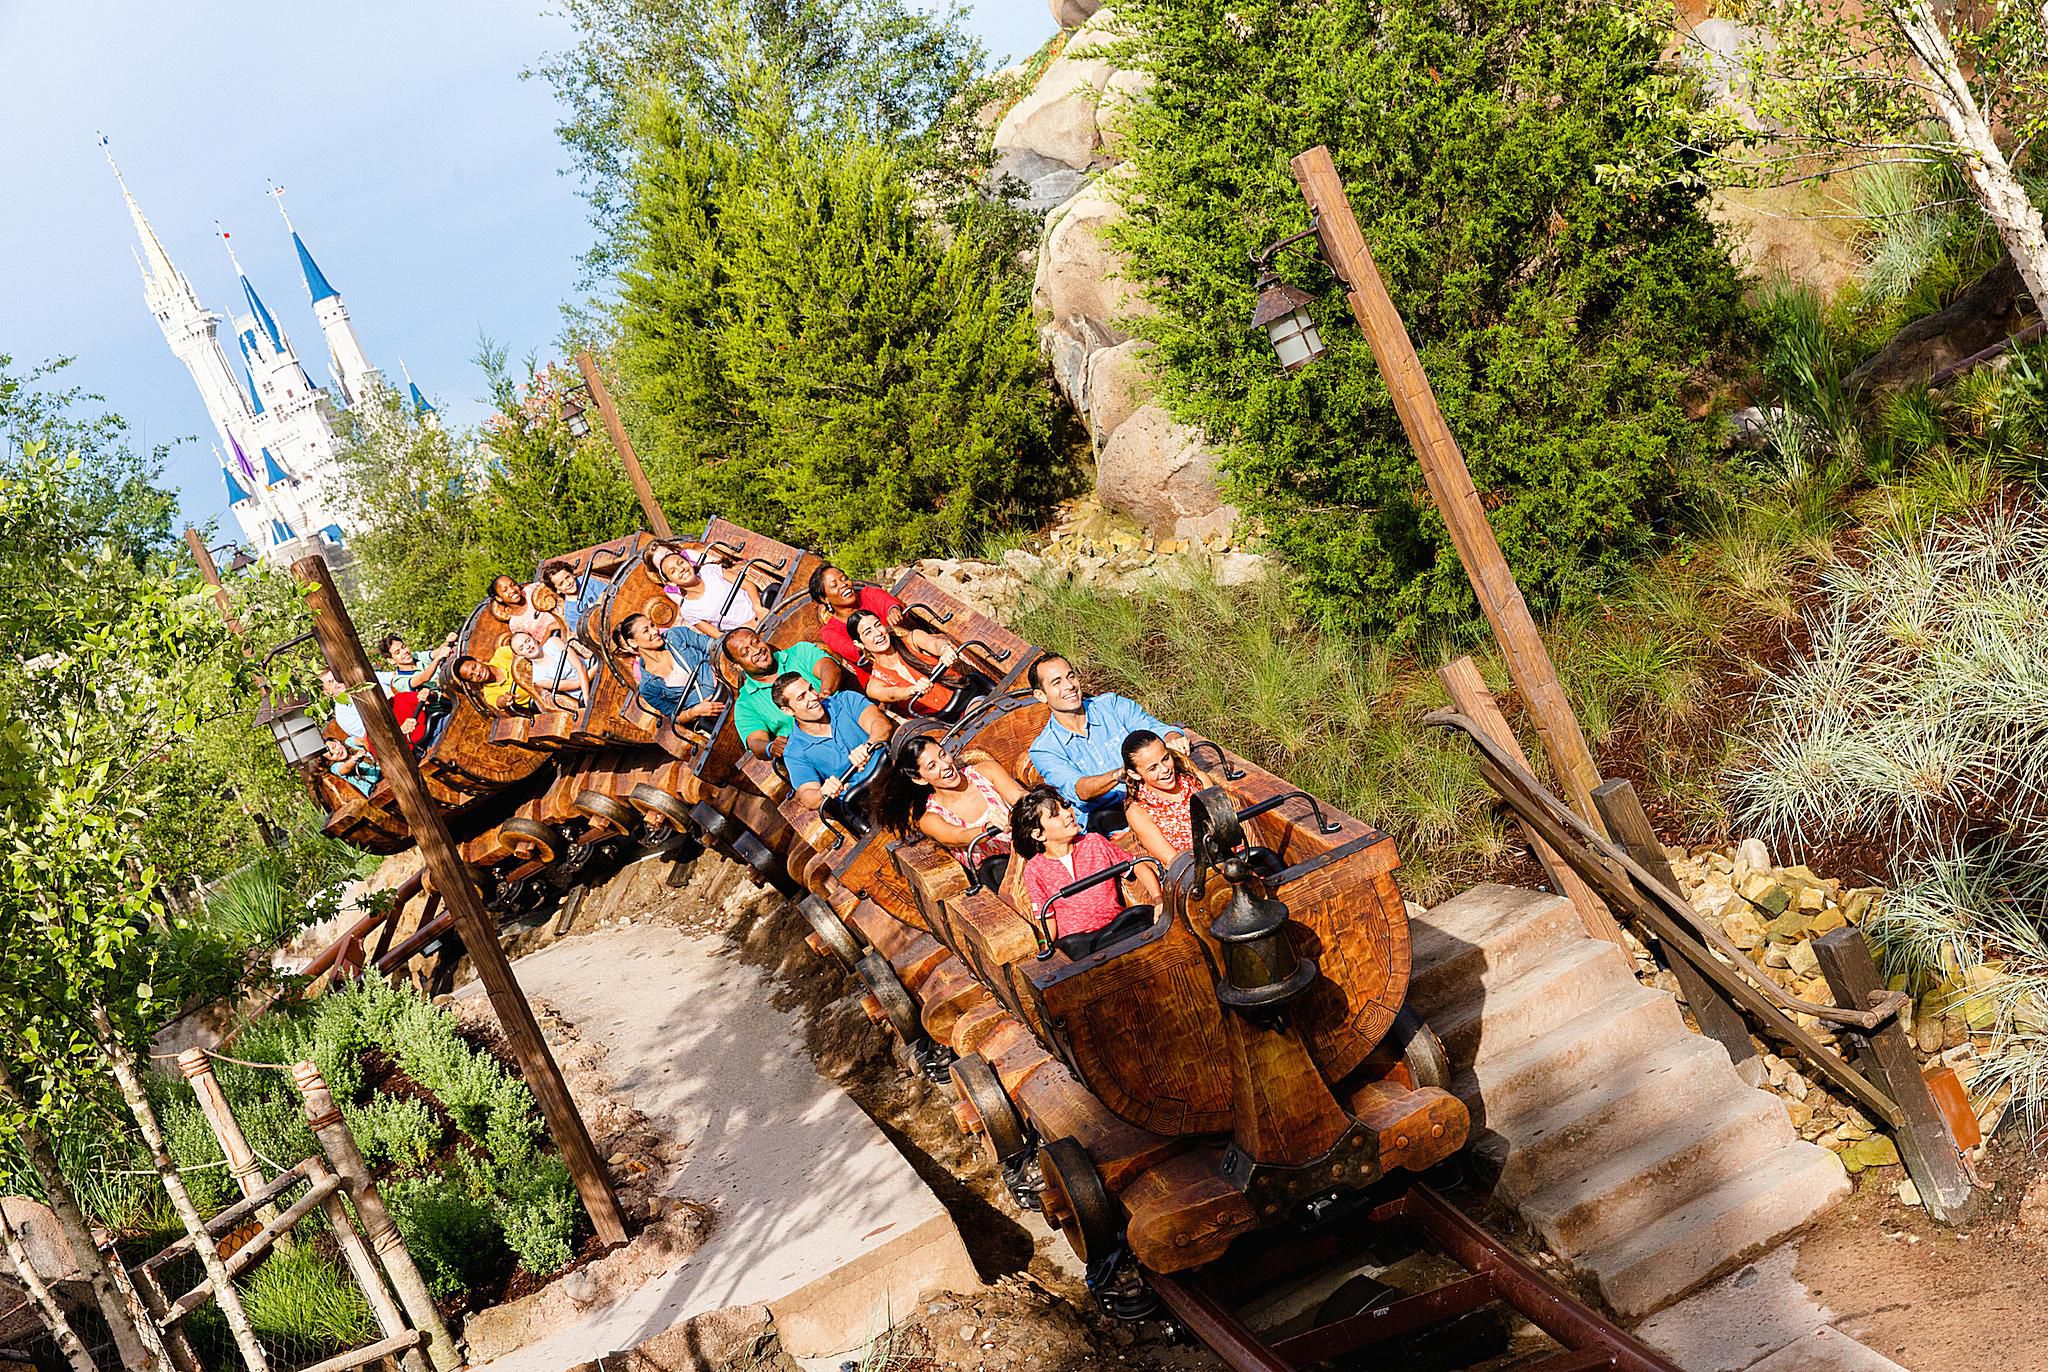 The famous Seven Dwarfs Mine Train is fun and rich in detail. 